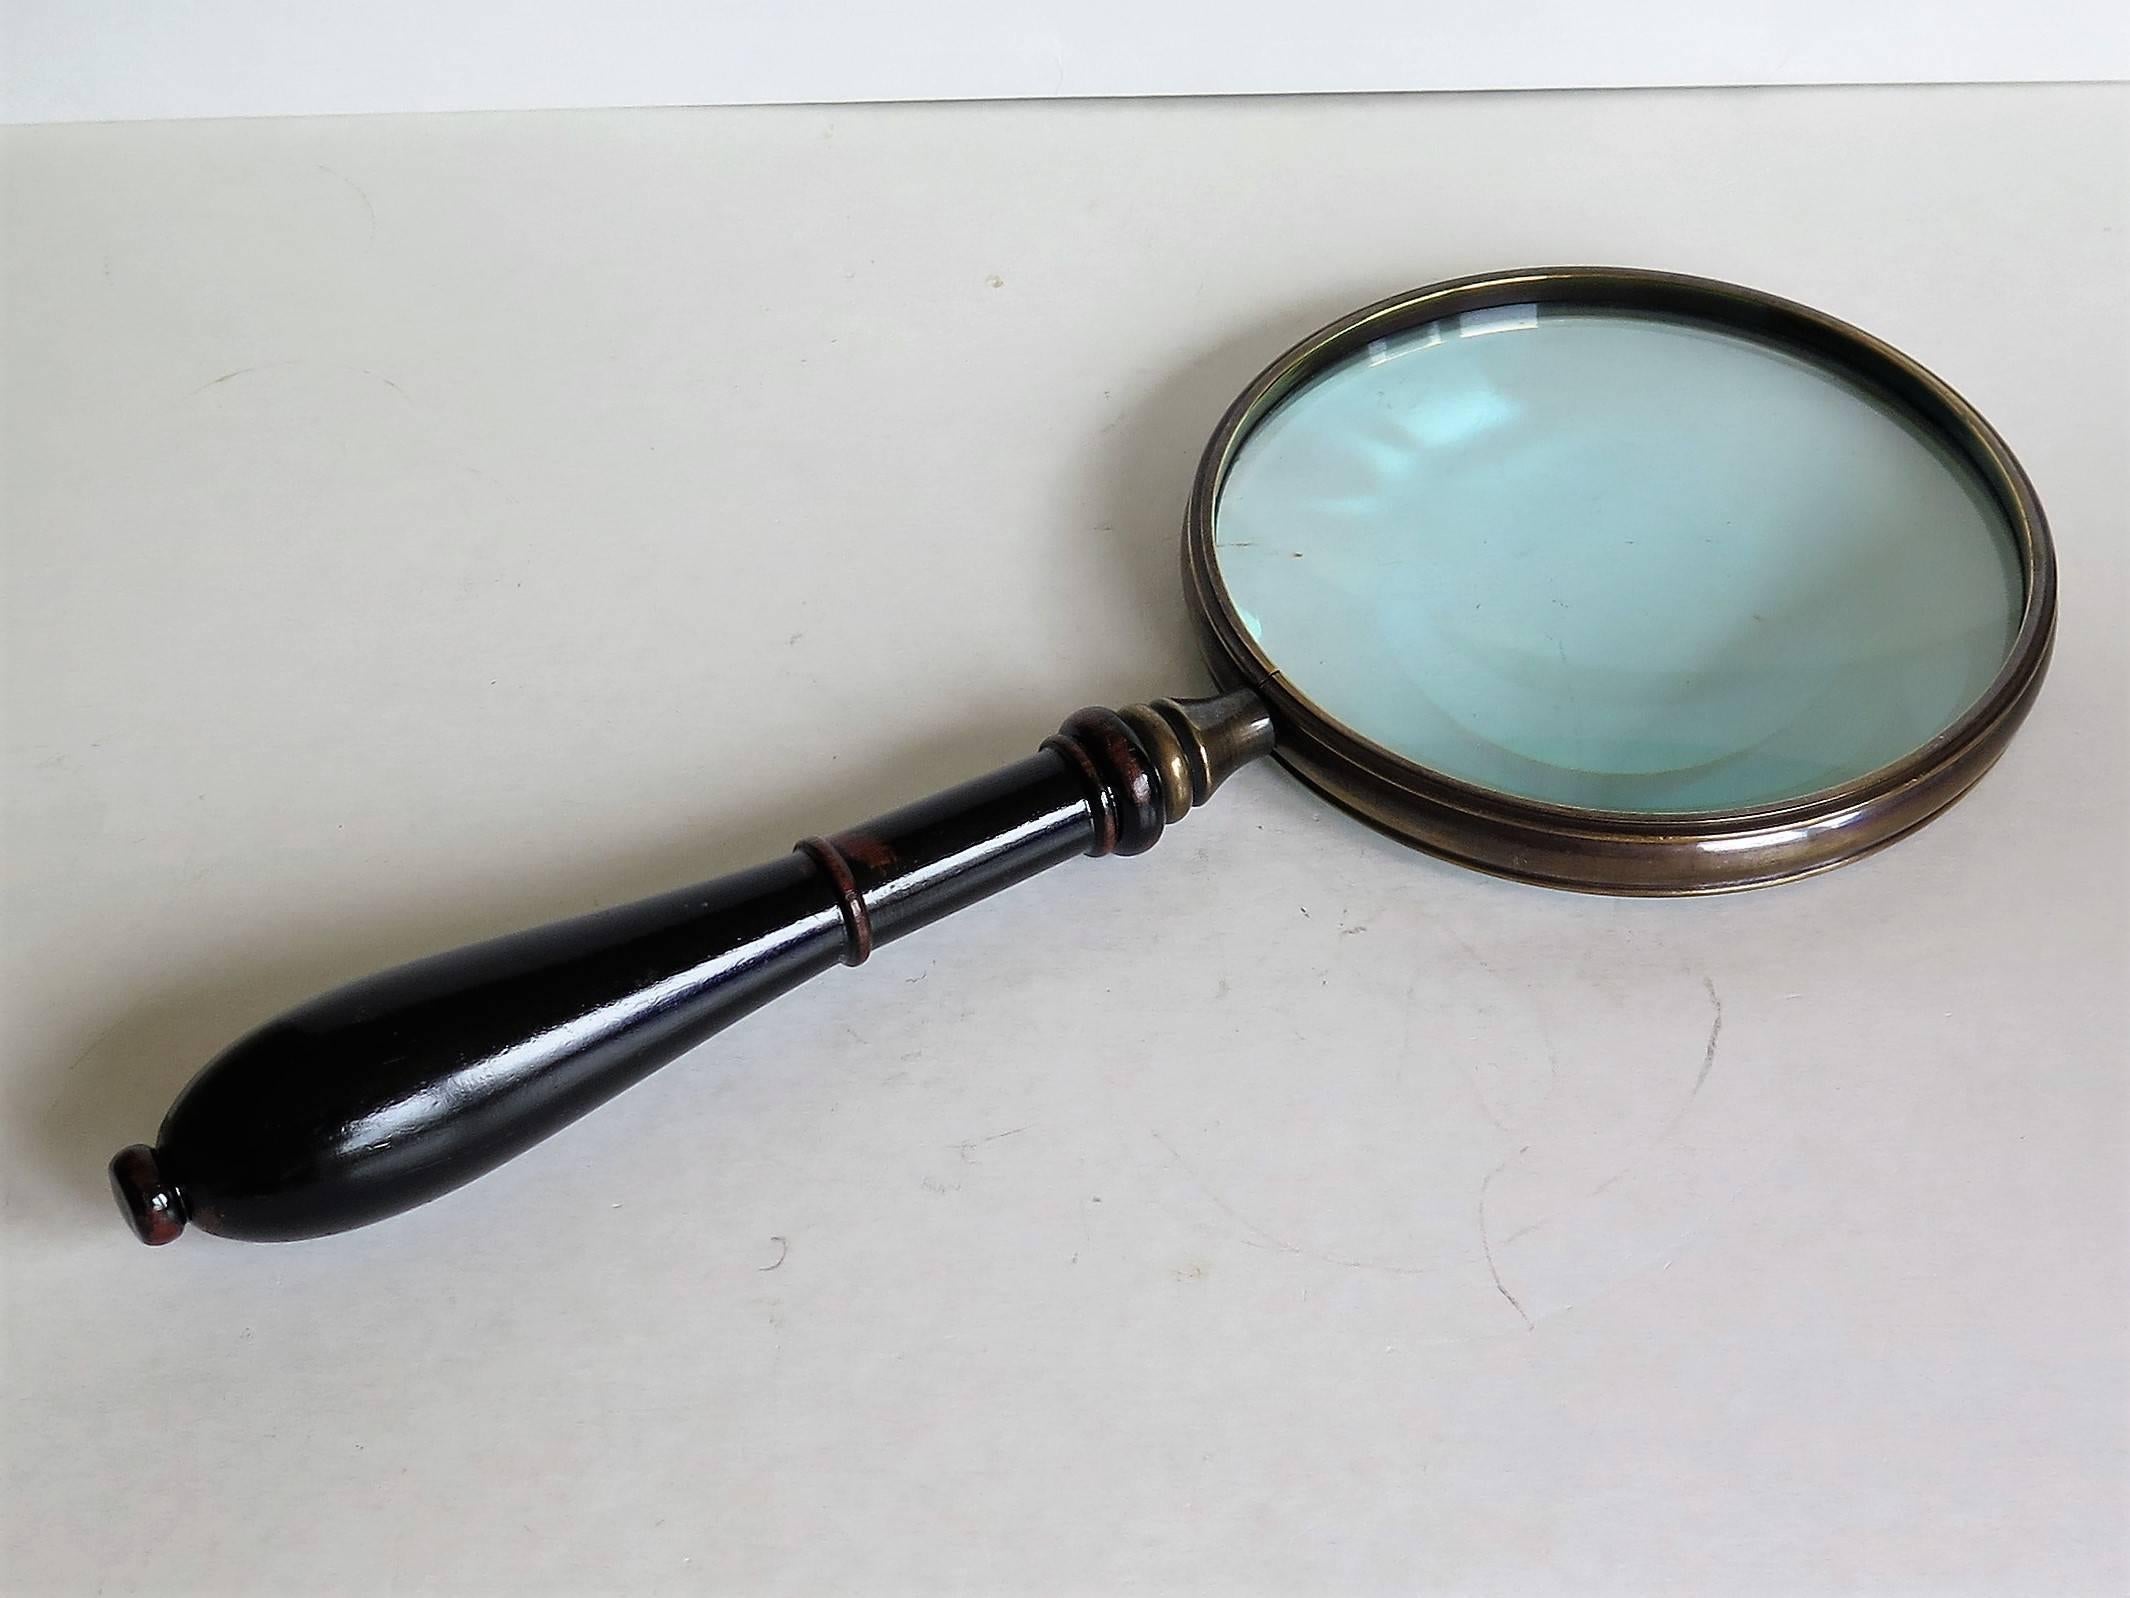 This is a substantial large and quite heavy magnifying glass from the mid Victorian 19th Century period.

The glass is in good condition and is held in a moulded bronze or brass circular frame with a turned support which locates into a nicely hand